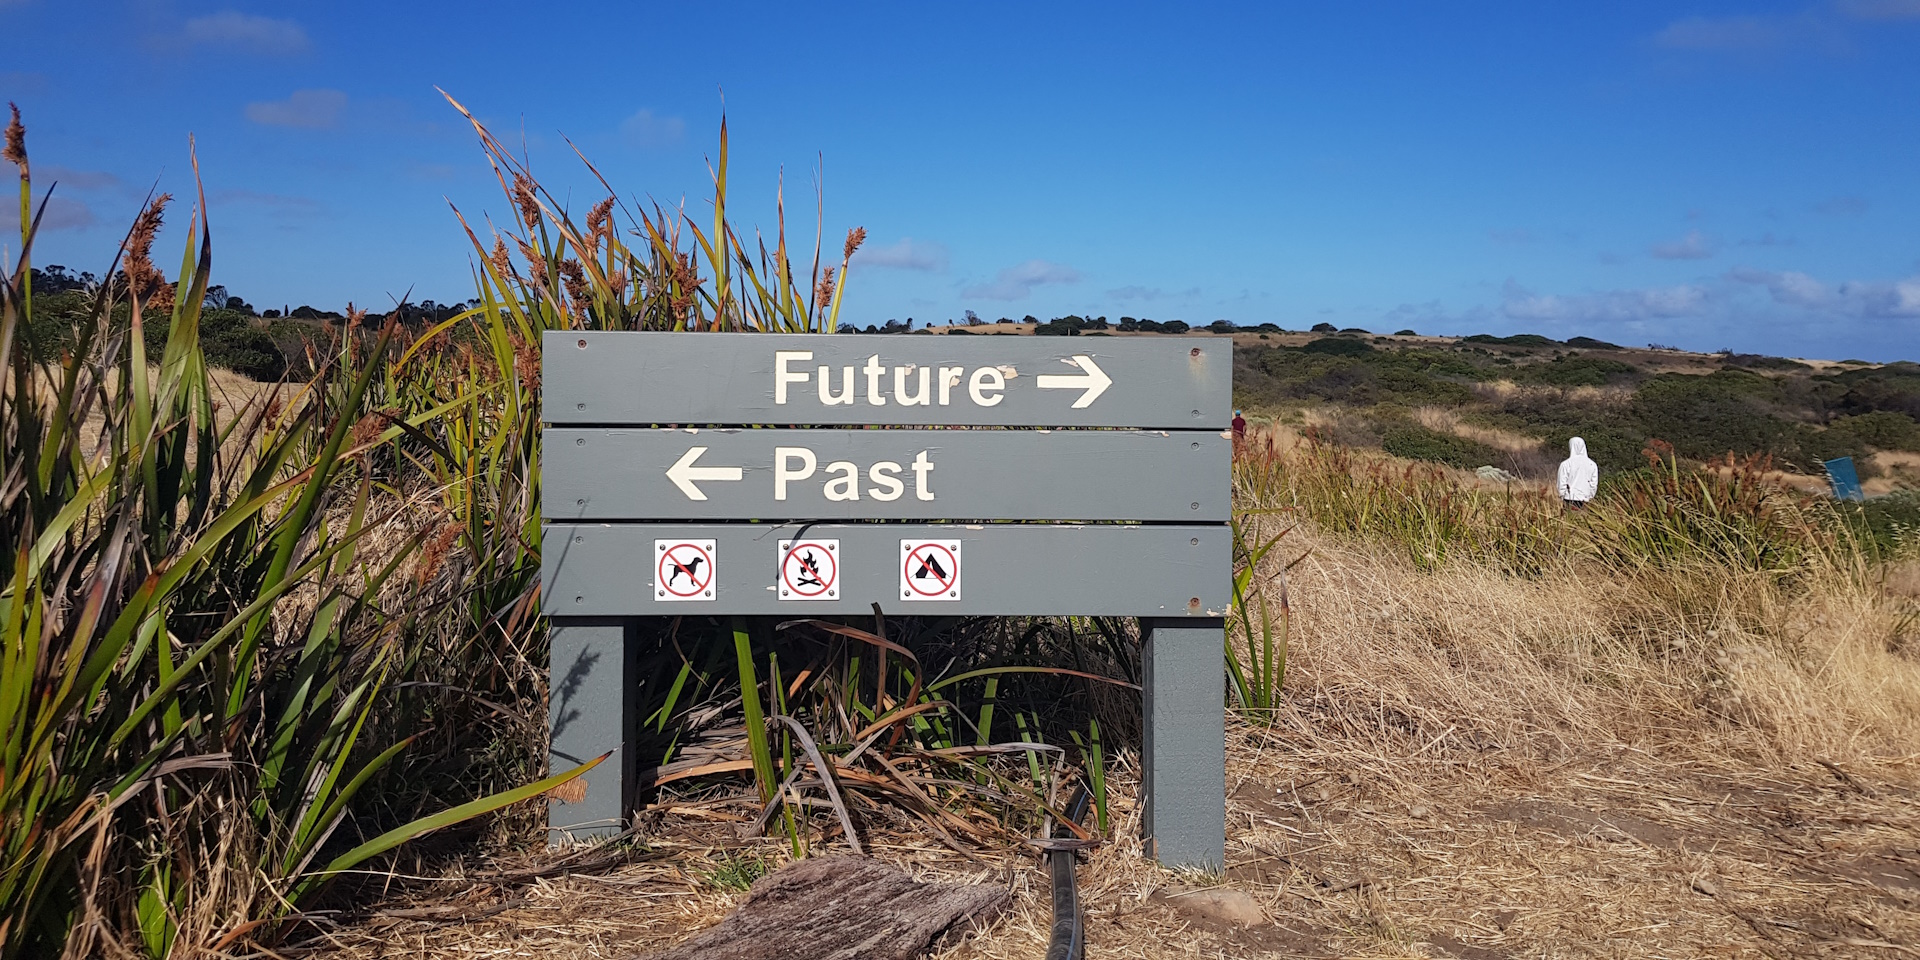 A sign located at beach including a text Future with an arrow pointing right at the top, a text Past with an arrow pointing left in the middle, and three symbols which prohibits dogs, fire and camping.